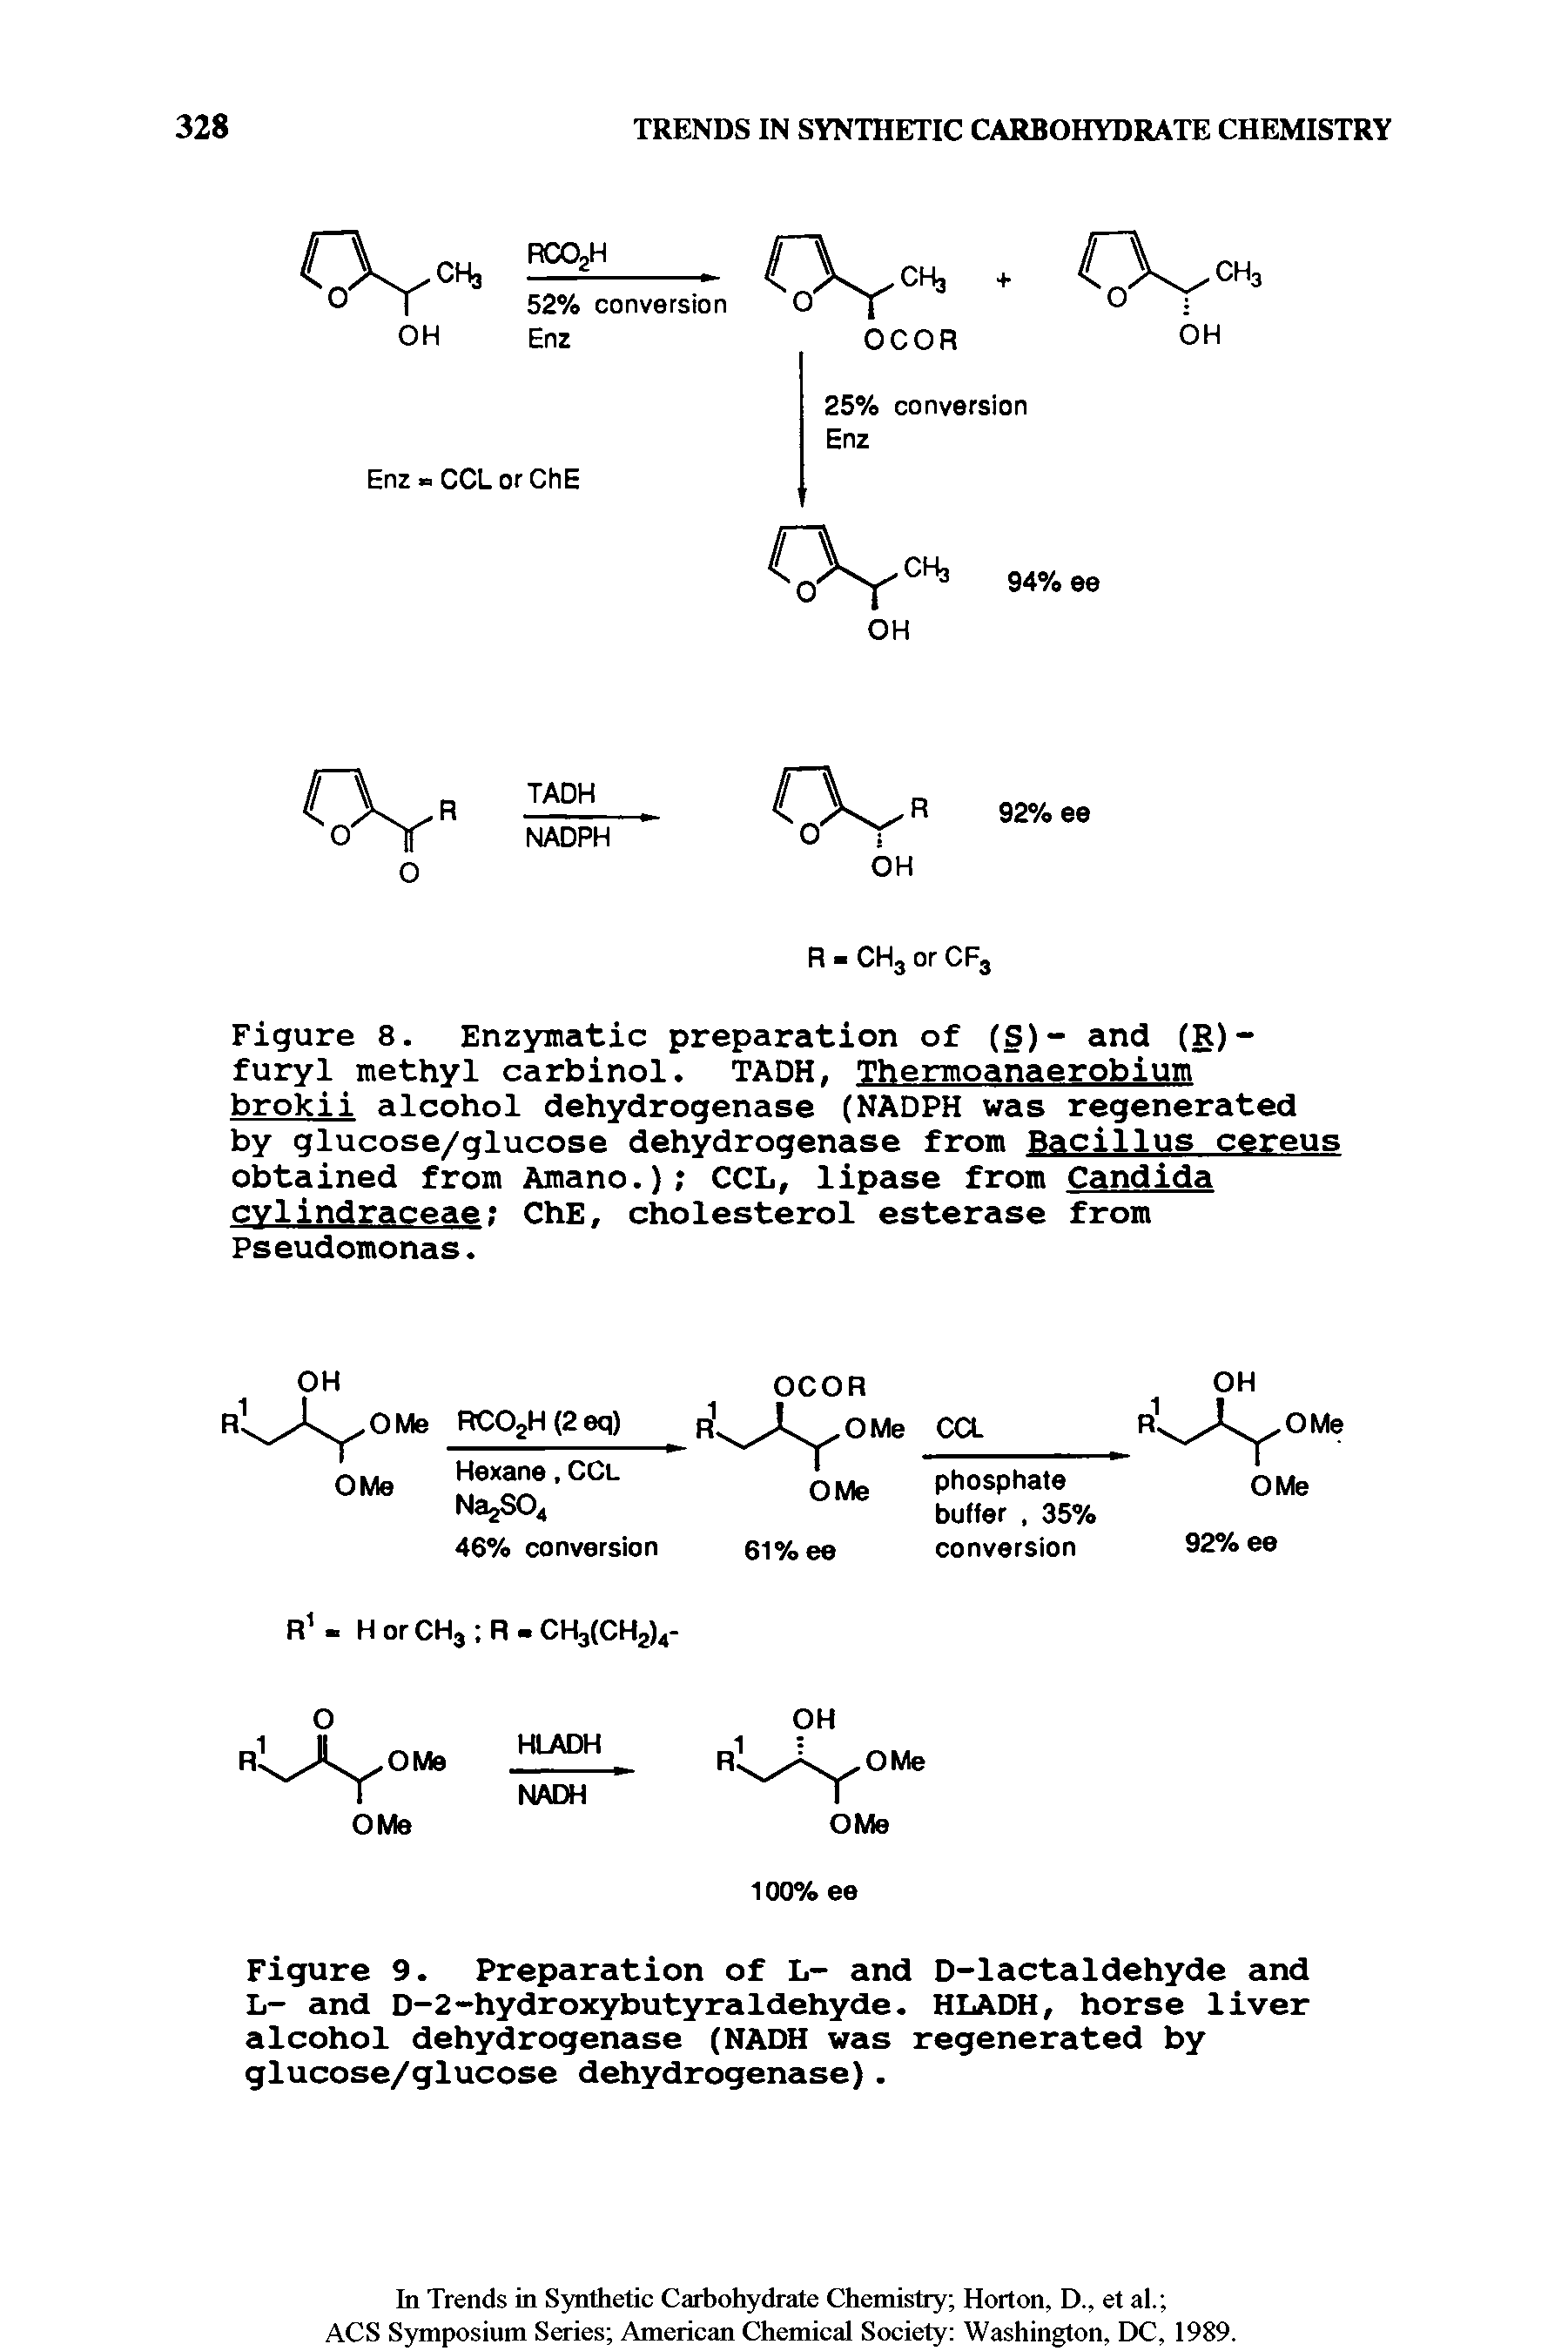 Figure 9. Preparation of L- and D-lactaldehyde and L- and D-2-hydroxybutyraldehyde. HLADH, horse liver alcohol dehydrogenase (NADH was regenerated by glucose/glucose dehydrogenase).